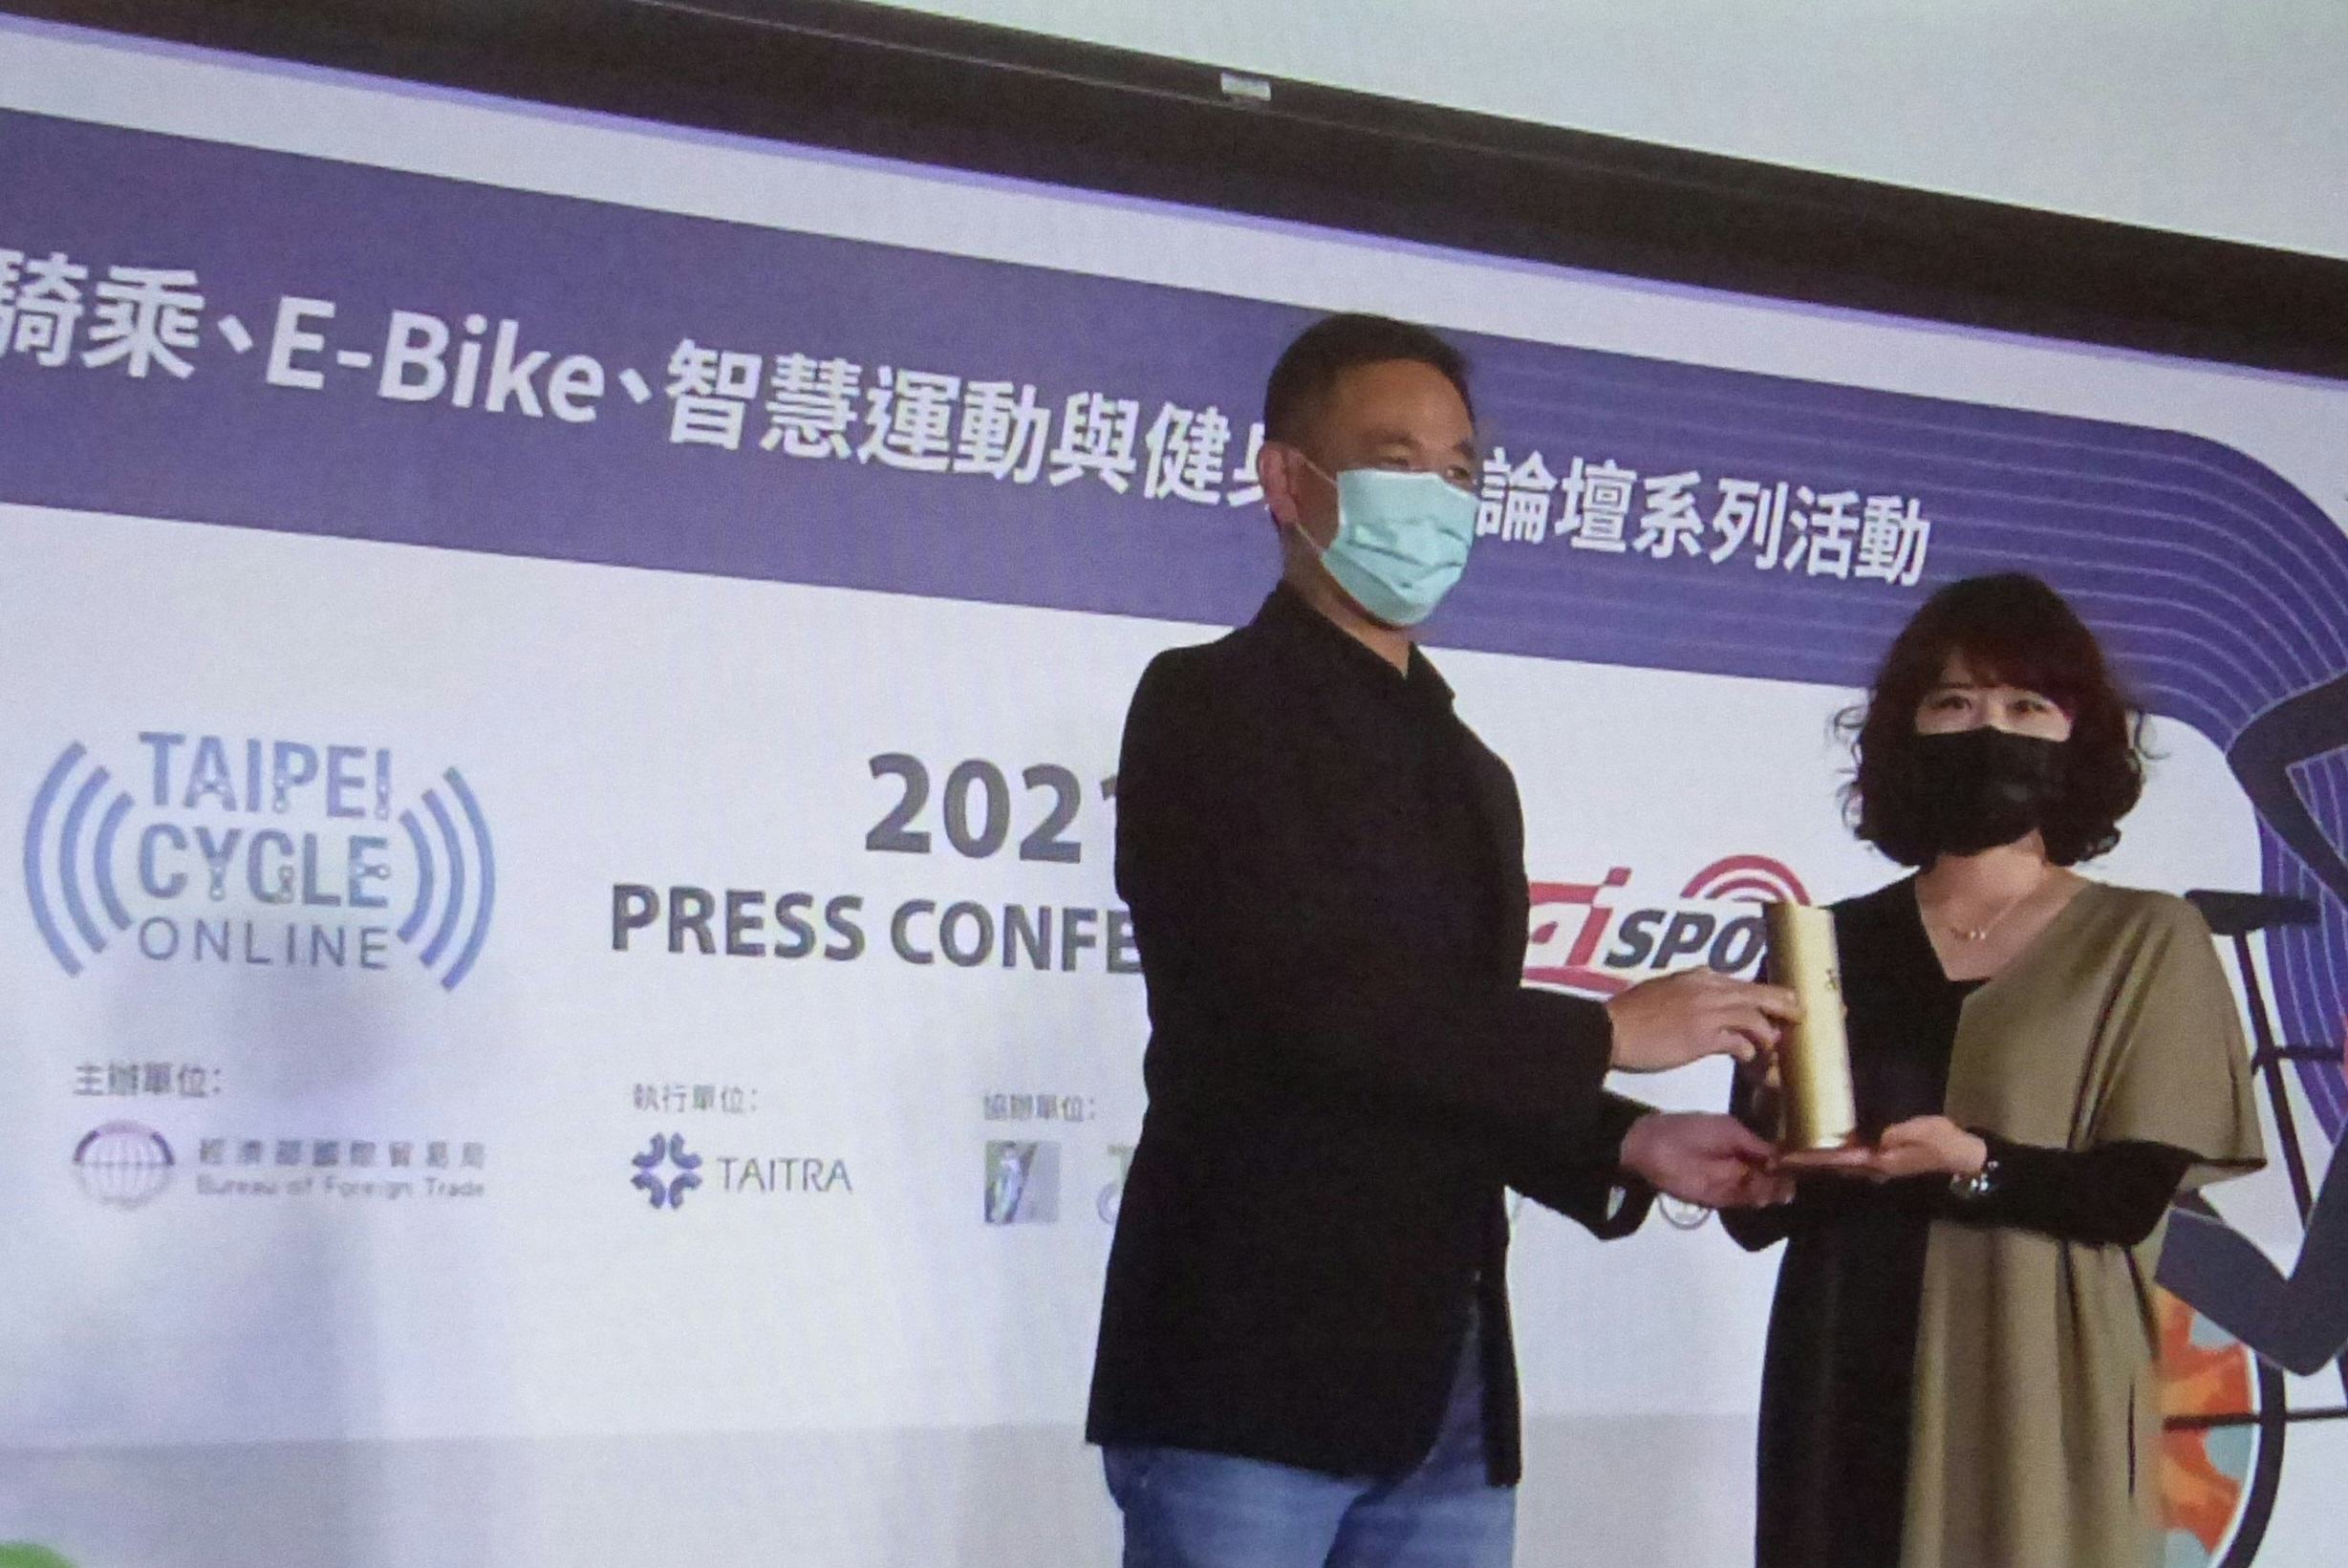 The Giant Group received two Gold Awards at the Taipei Cycle d&i awards ceremony. – Photo Bike Europe